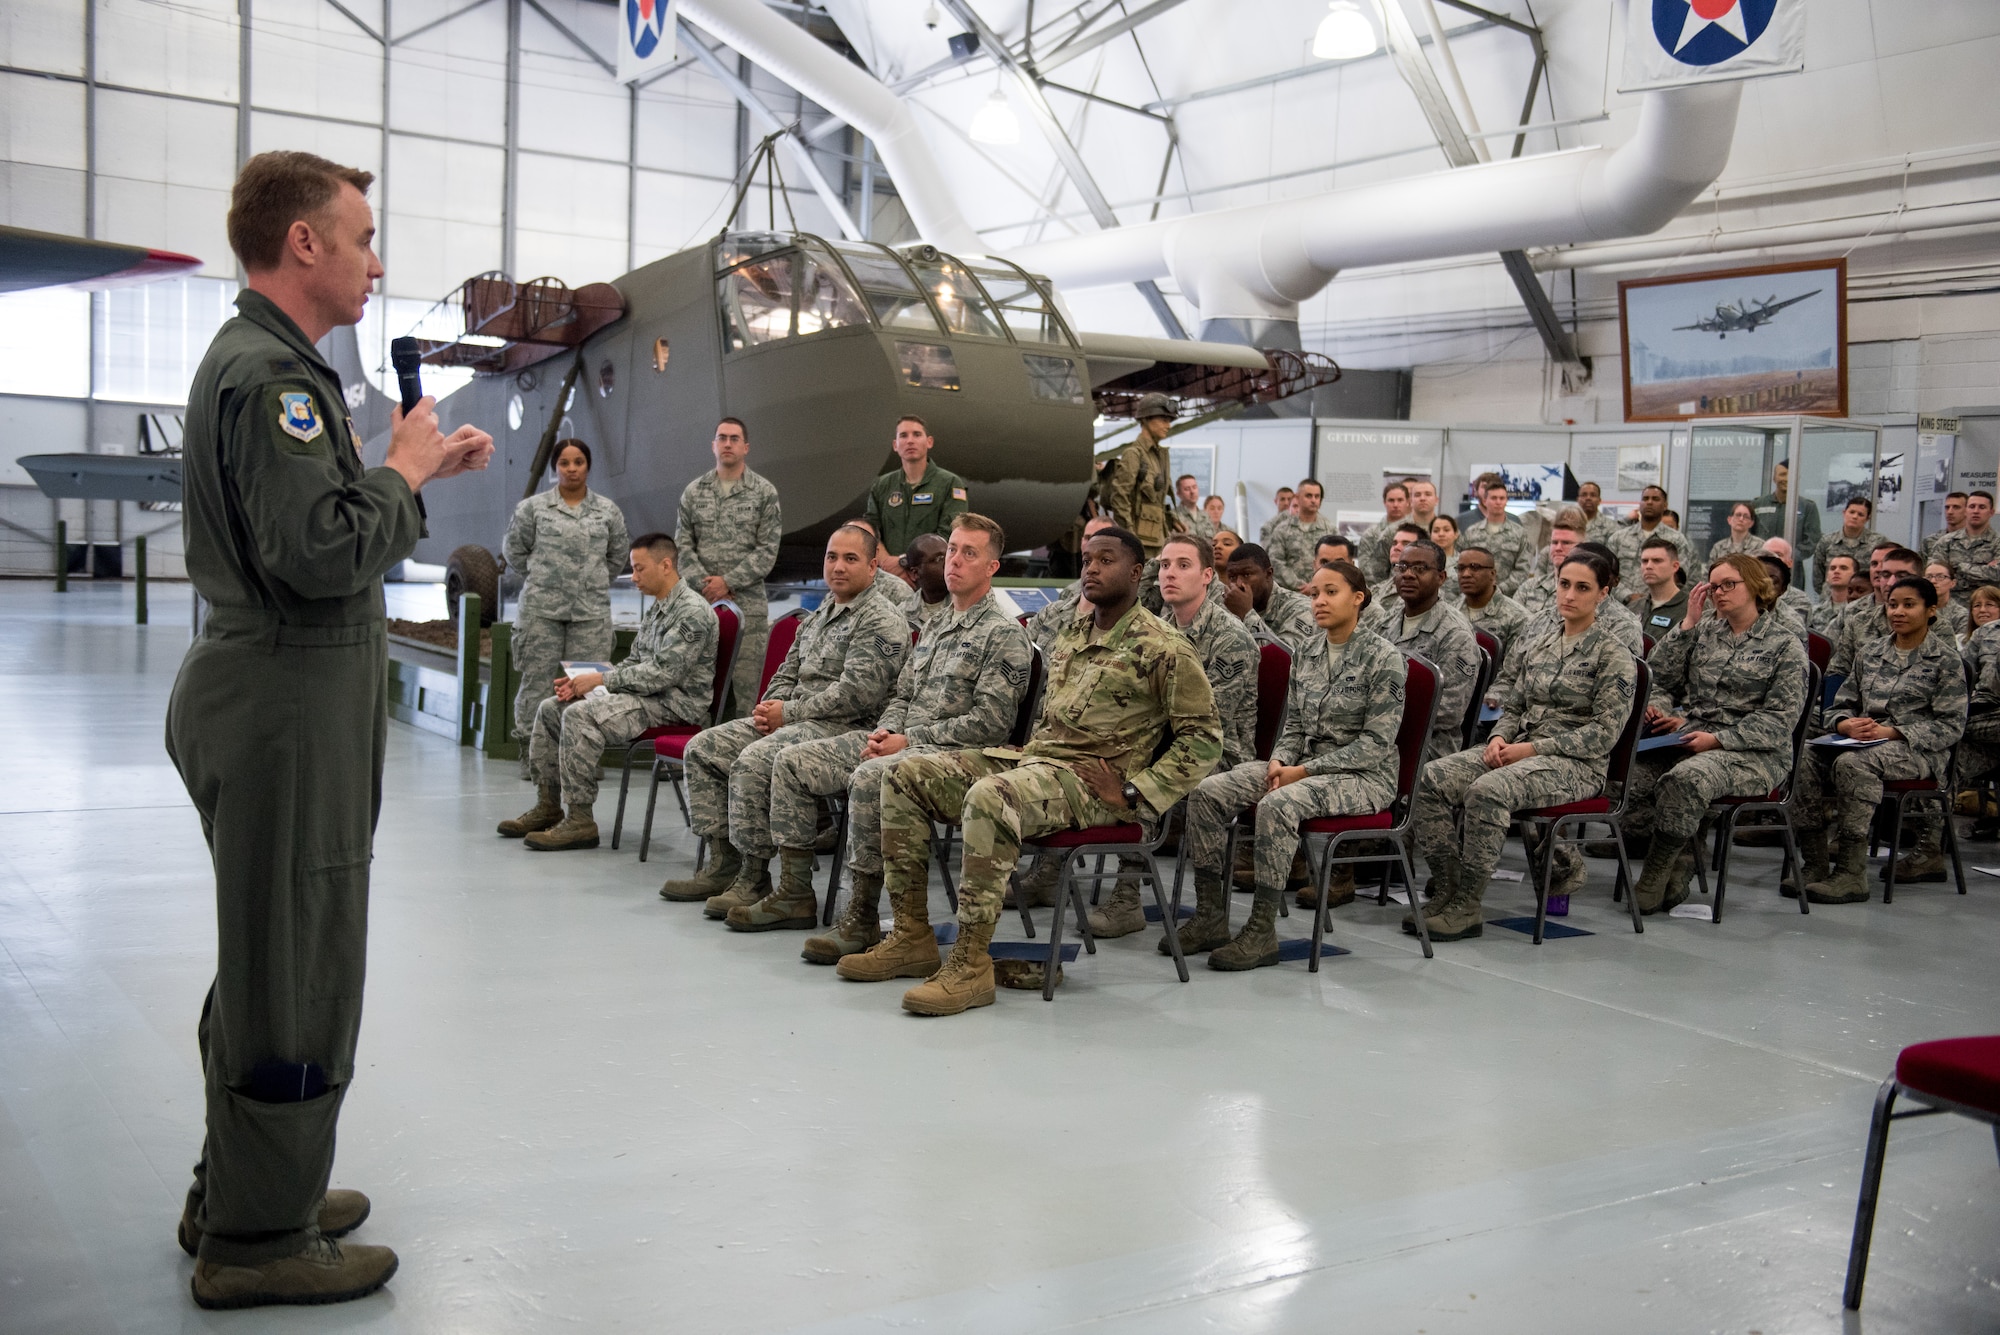 Col. Norman Shaw, 512th Airlift Wing vice commander, speaks to noncommissioned officer inductees during the noncommissioned officer induction ceremony at the Air Mobility Command Museum in Dover, Delaware, May 19, 2019. Seventy-seven newly promoted staff sergeants were charged with new responsibilities as they accepted the role within their new rank. (U.S. Air Force photo by Capt. Katie Spencer)